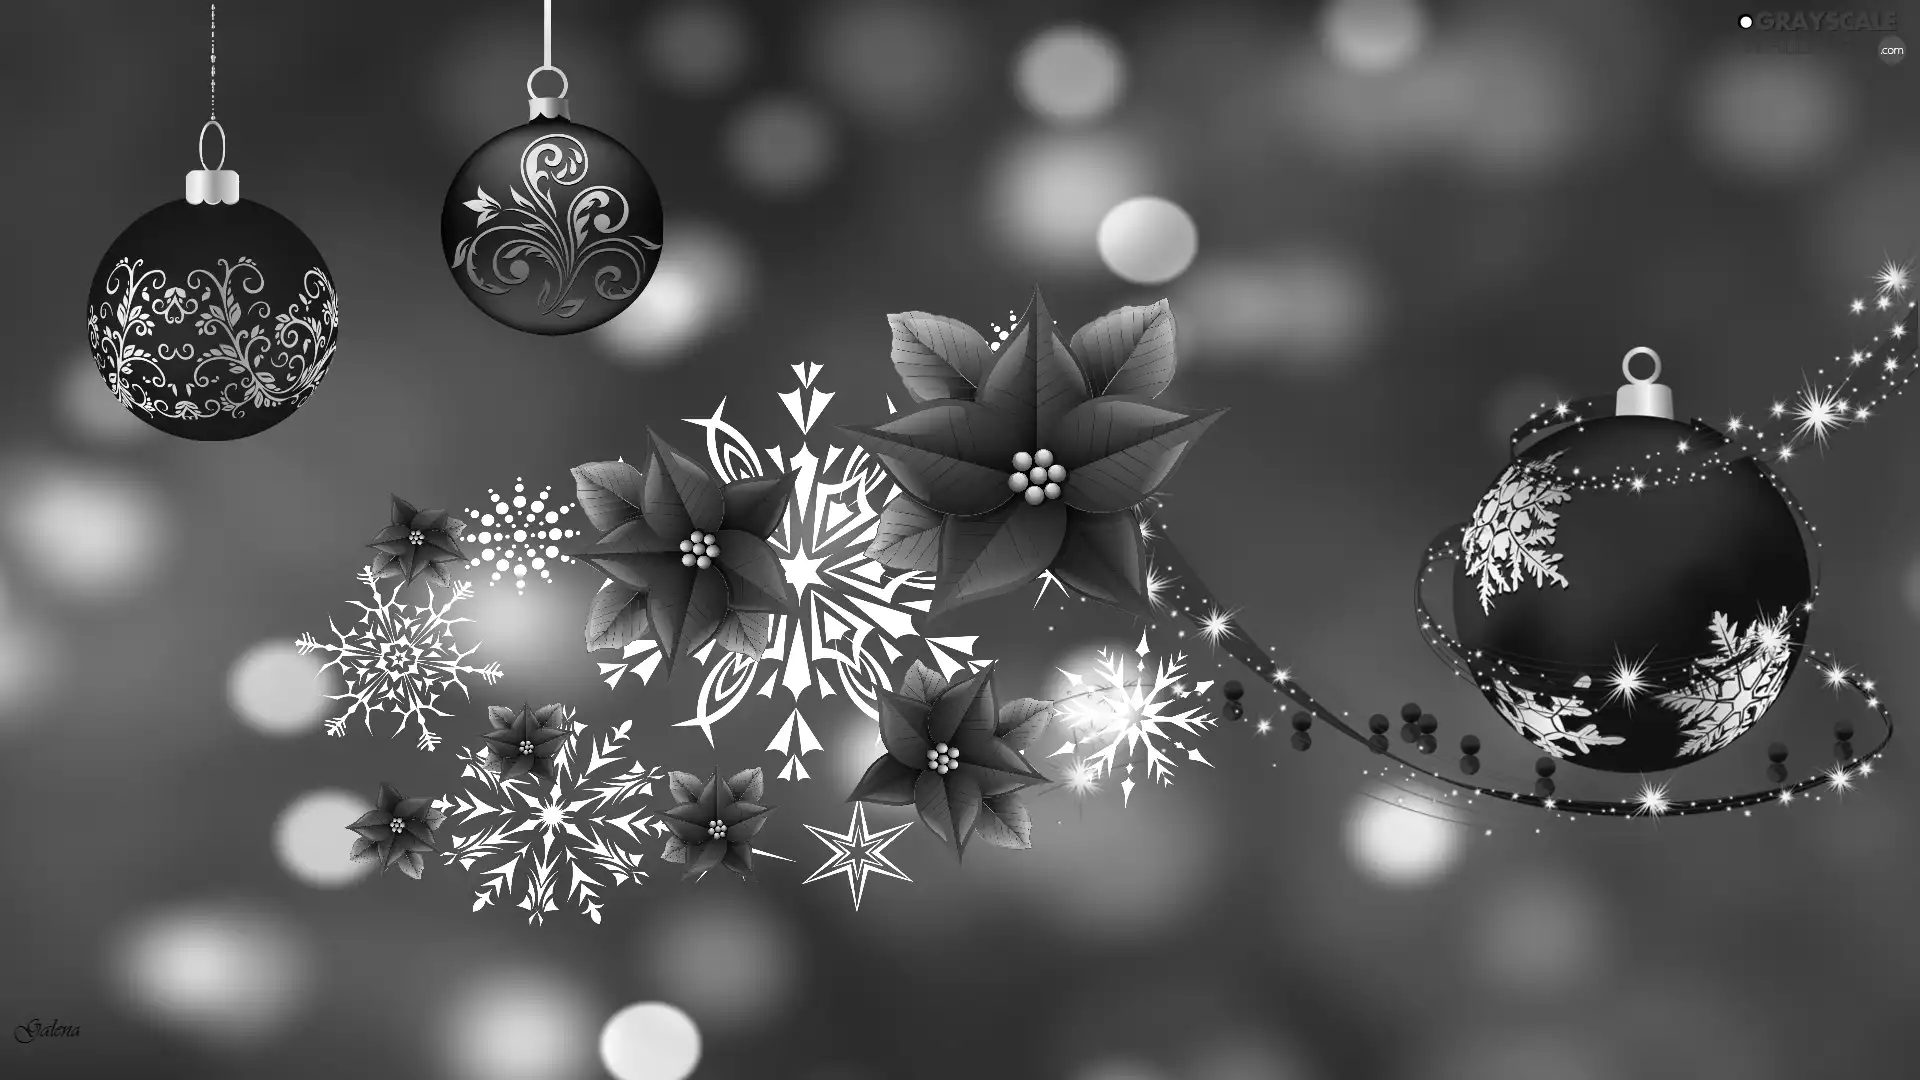 Flowers, Christmas, graphics, baubles